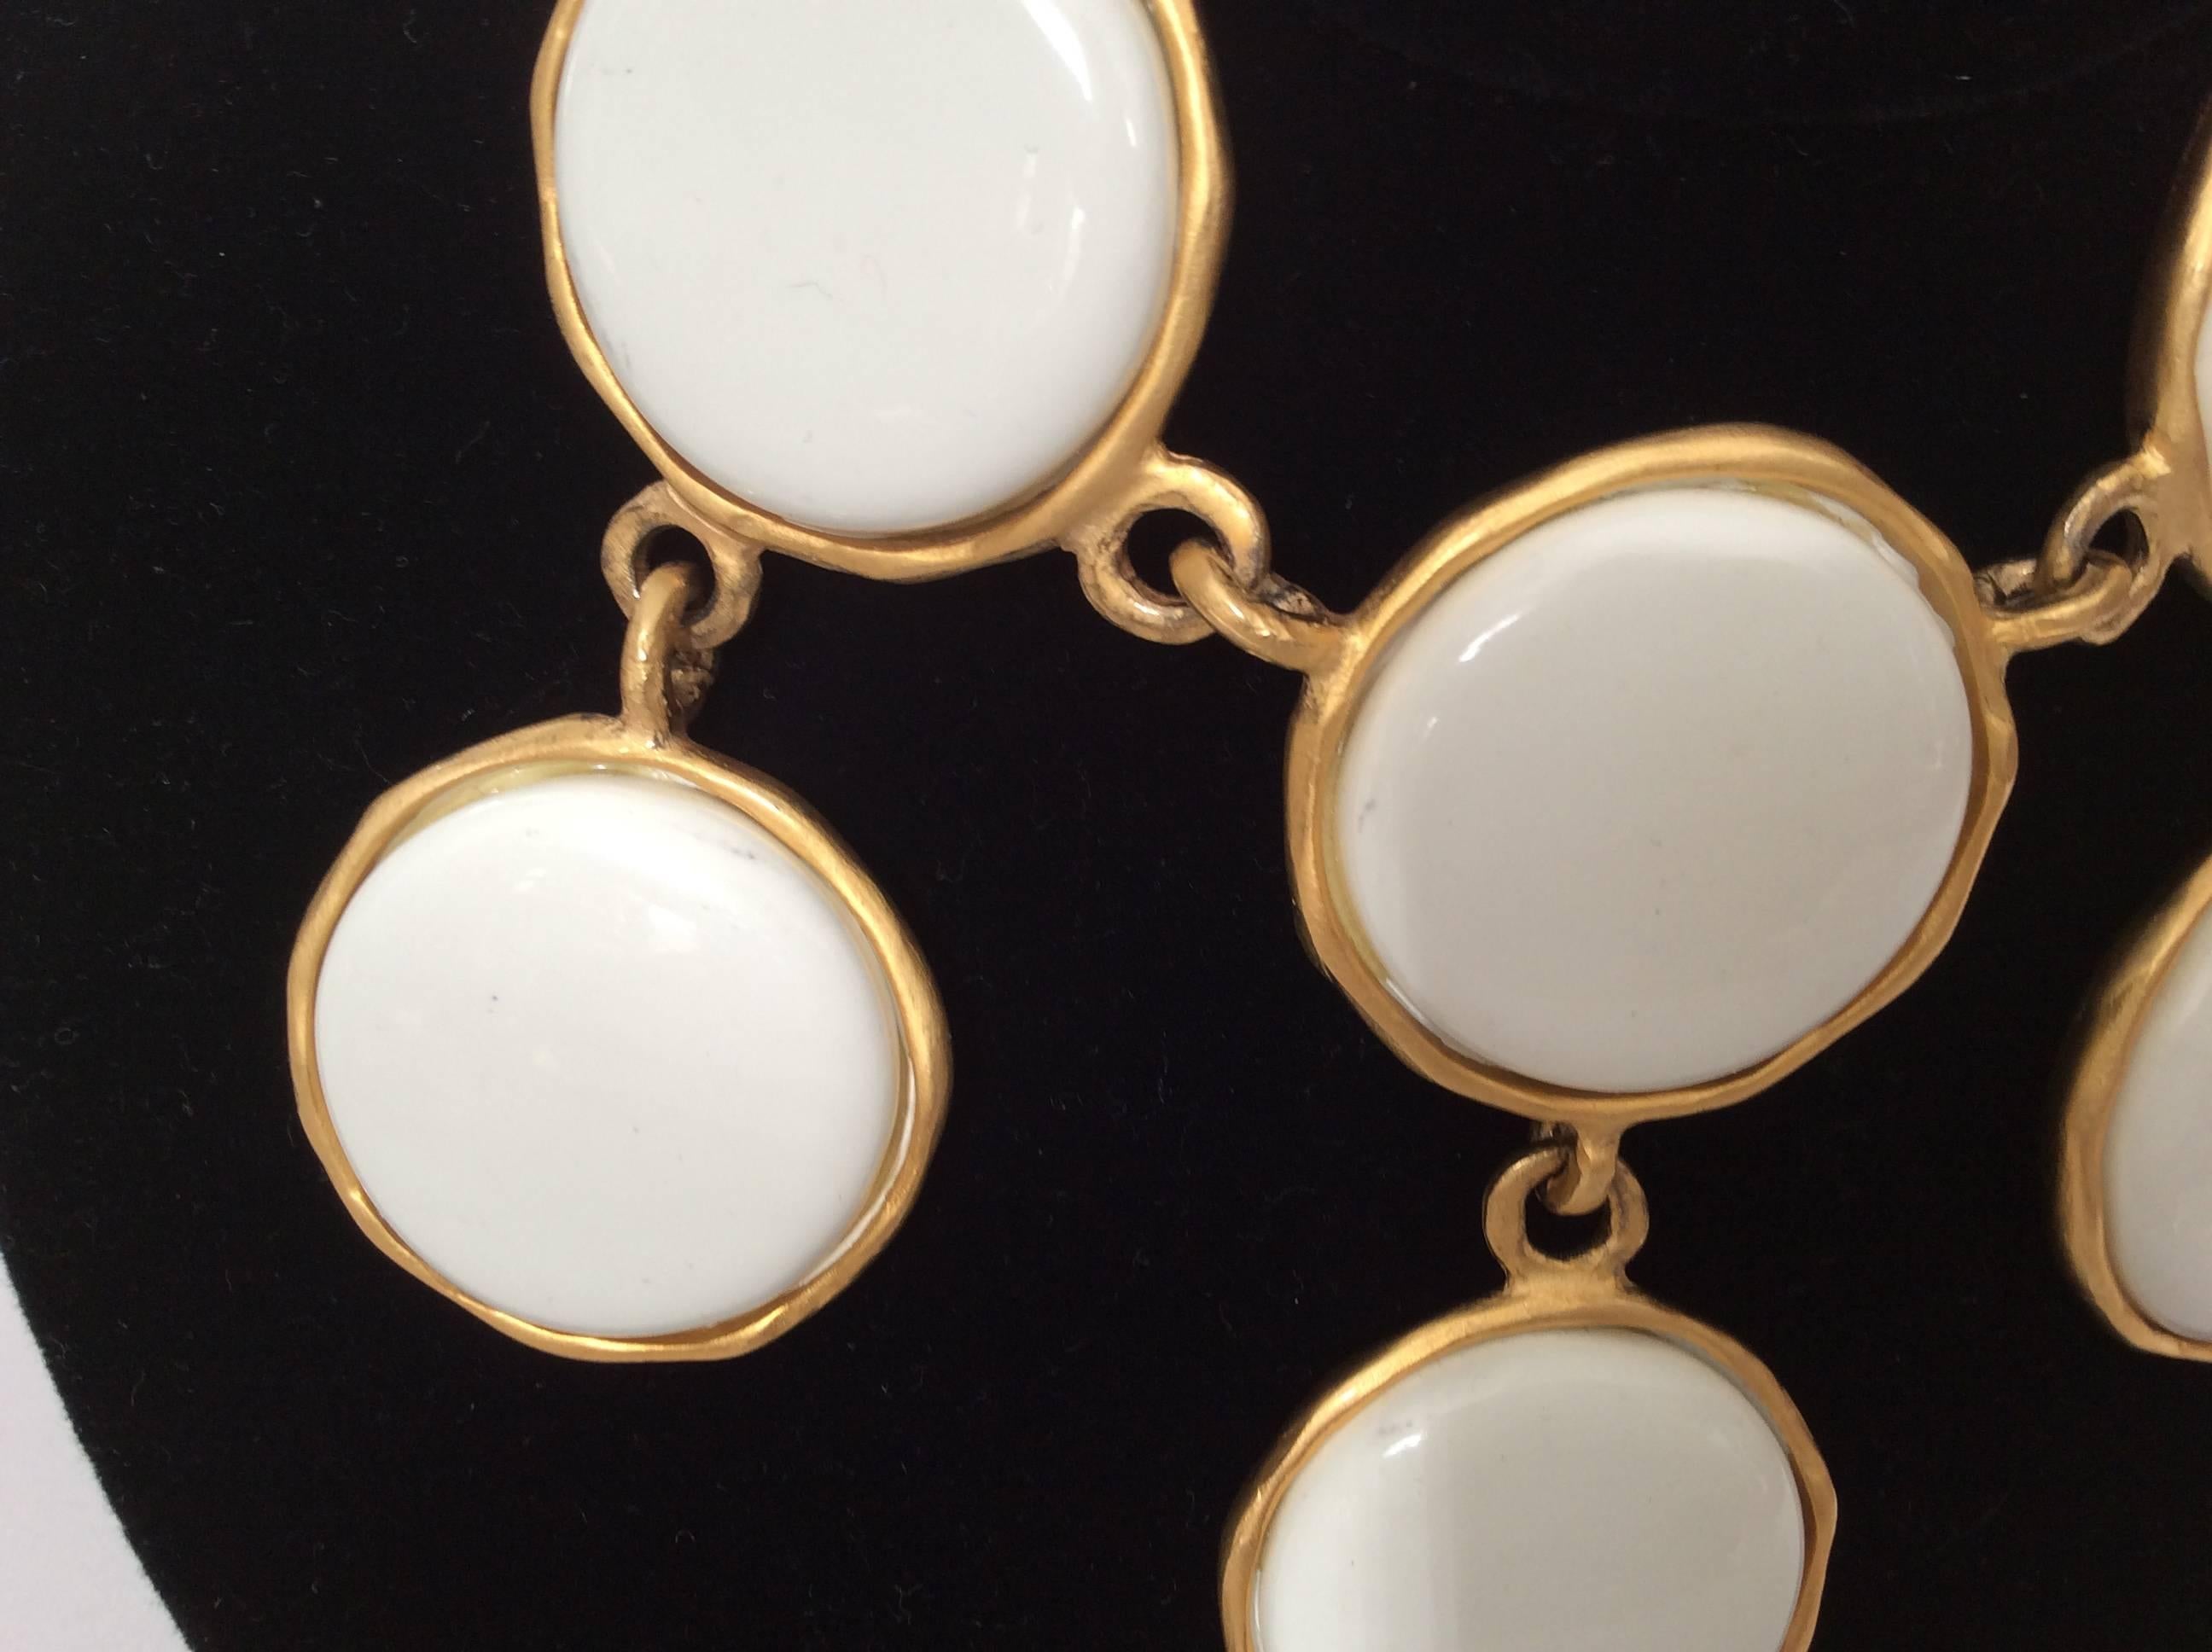 Kenneth J. Lane white necklace with matching earrings set. Gorgeous necklace that is a gold tone chain adorned with a series of 6 white circular charm links. The necklace is from the 1980's and is a great addition to any jewelry collection. The